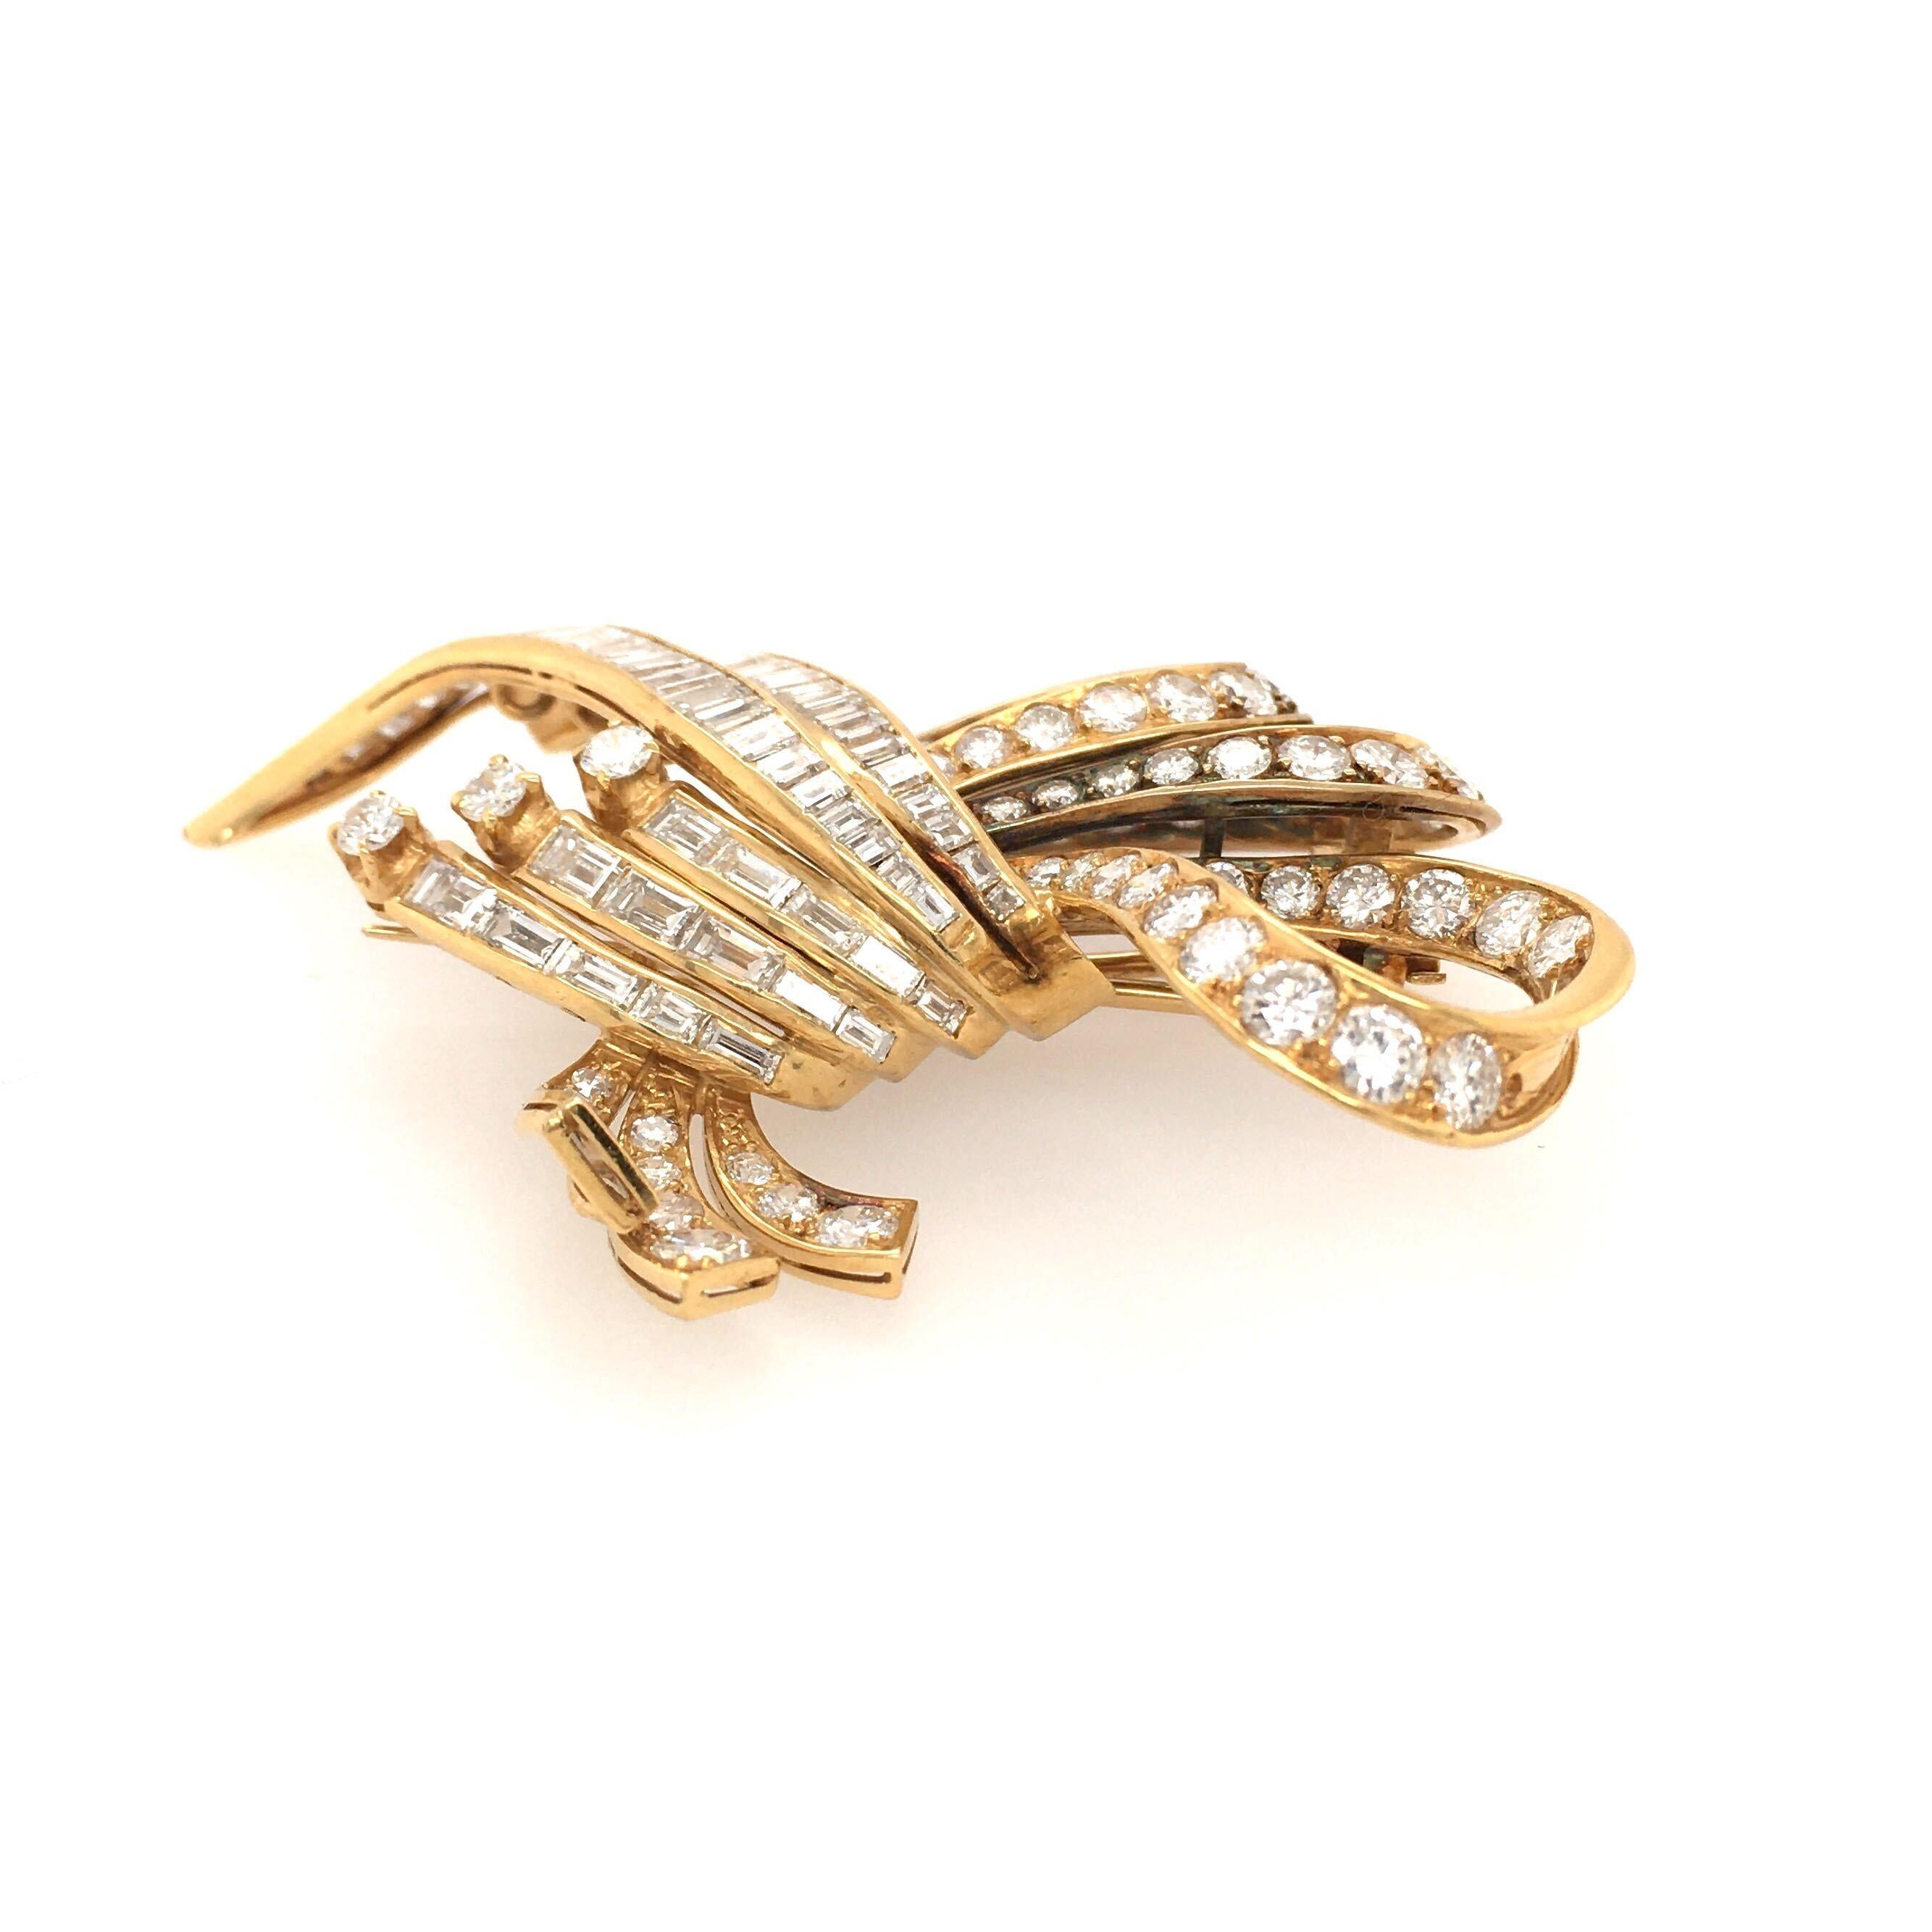 An 18 karat yellow gold and diamond brooch. Designed as a scrolling circular and baguette cut diamond ribbon. Sixty one (61) circular and fifty five (55) baguette cut diamonds weigh approximately 5.20 carats. Length is approximately 2 1/2 inches,